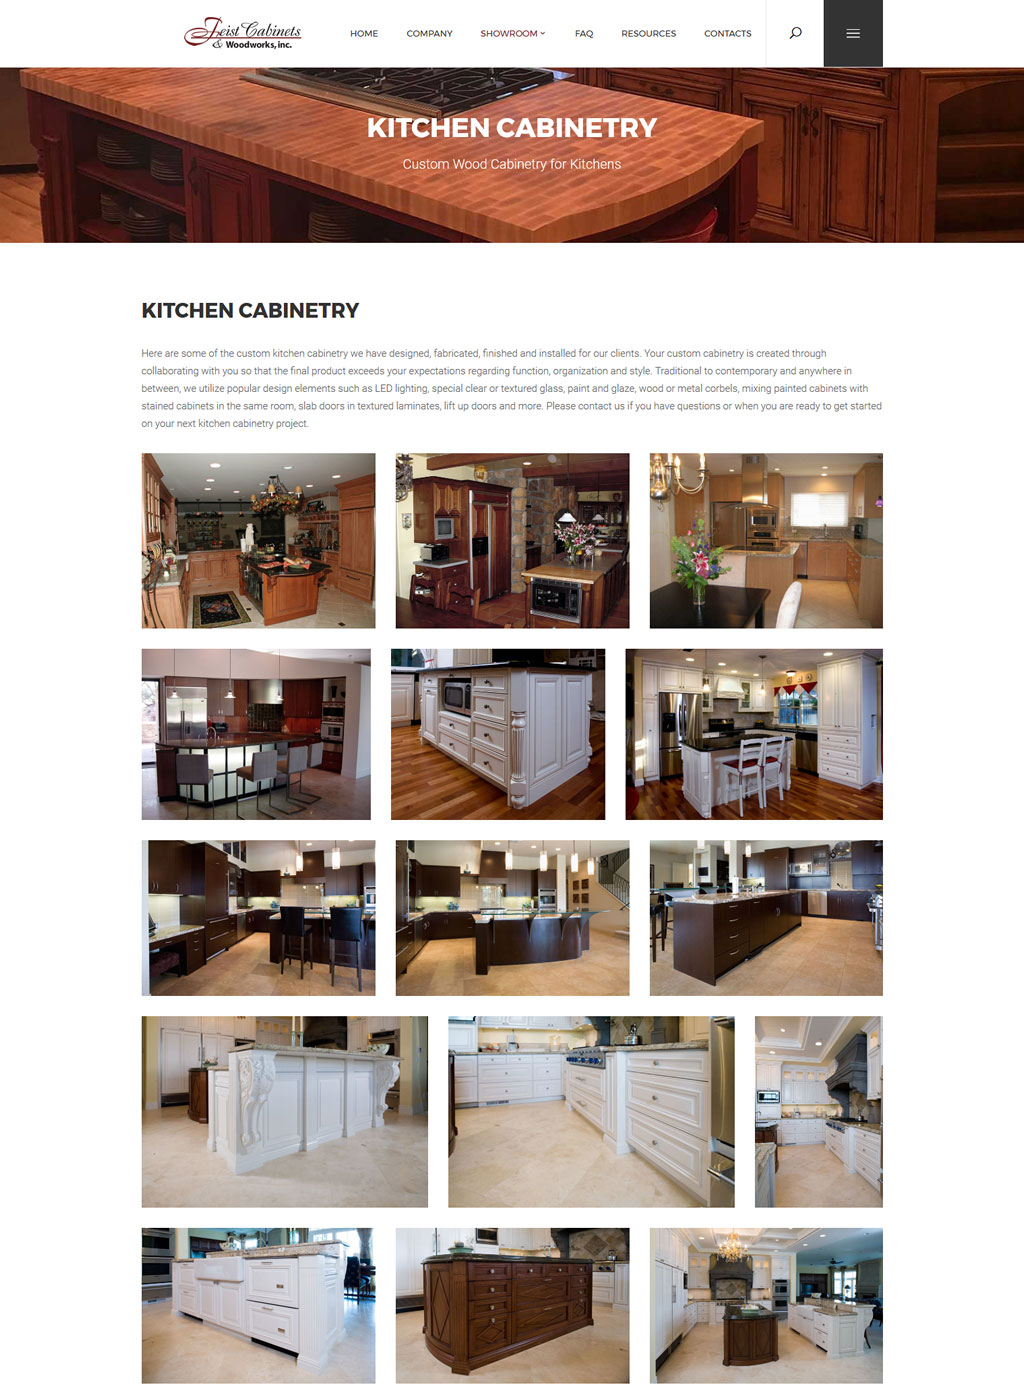 Feist Cabinets and Woodworks, Inc.